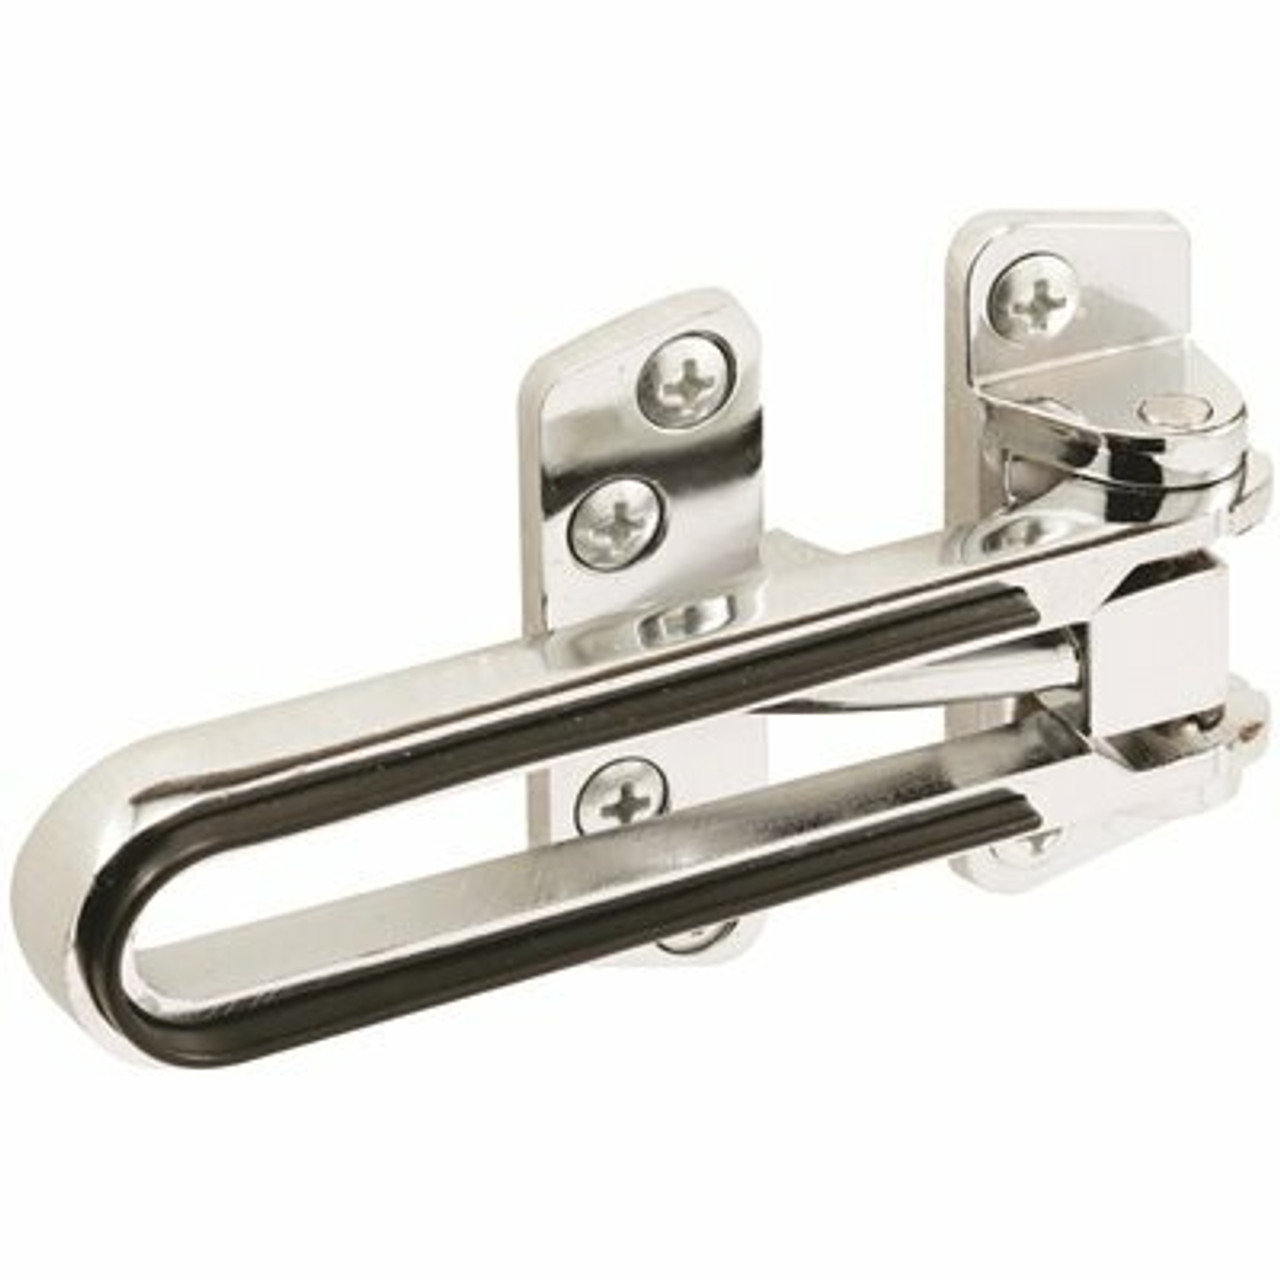 Prime-Line Swing Bar Lock, Features Rubber Bumper, Diecast Zinc, Polished Chrome Plated Finish